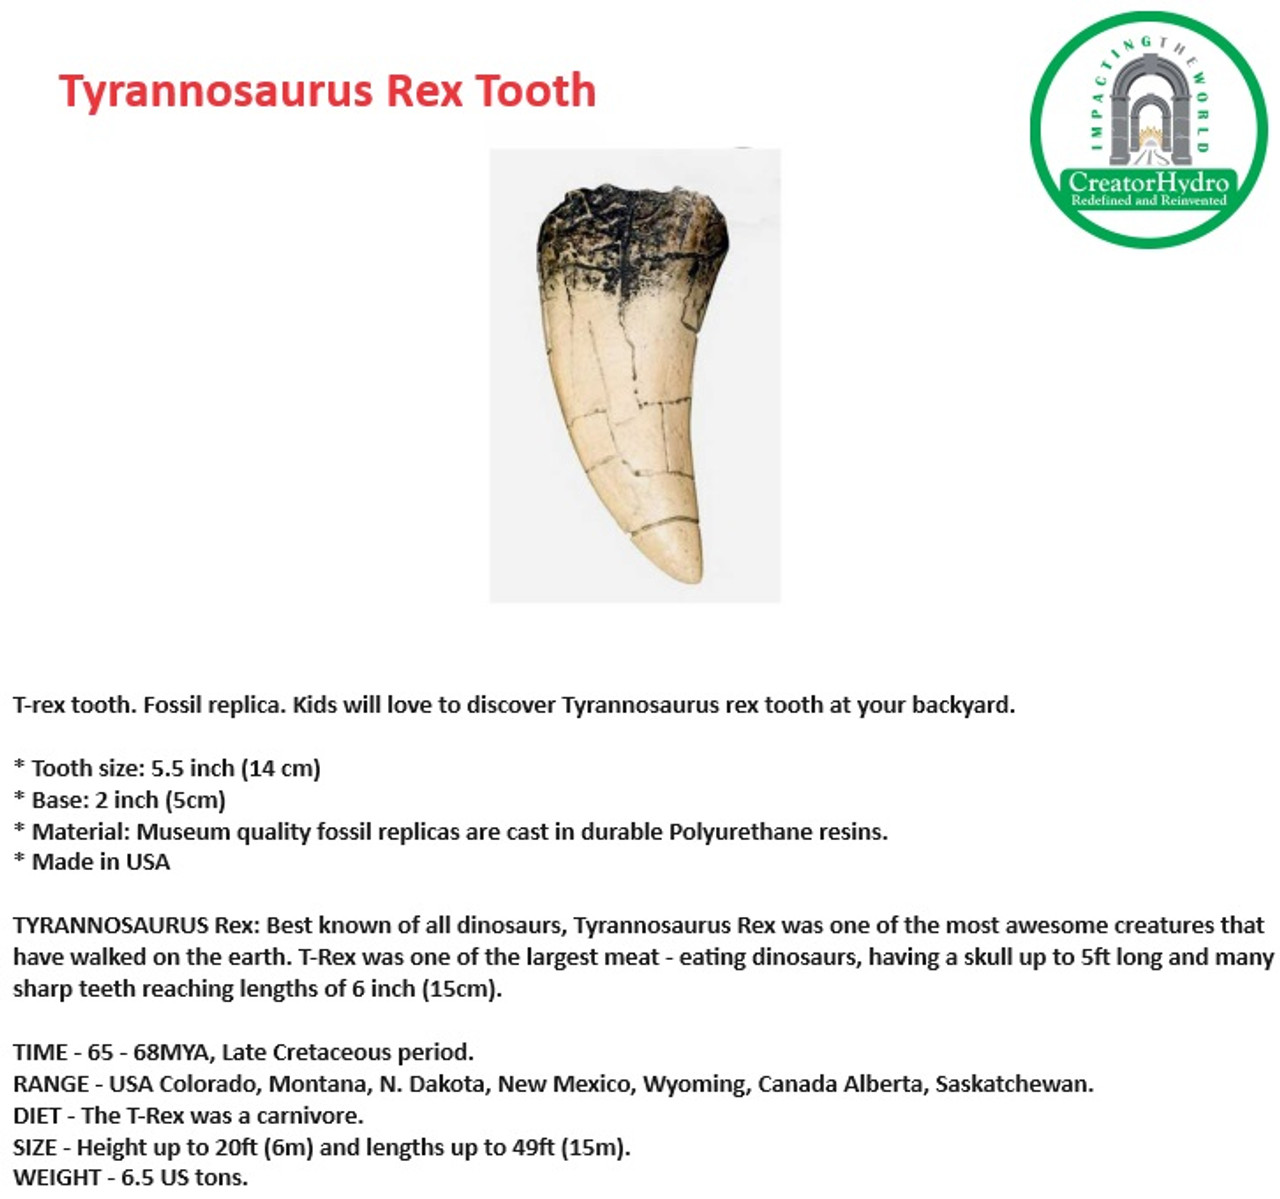 T-rex tooth. Fossil replica| Tooth size: 5.5 inch |Museum quality fossil replicas |TYRANNOSAURUS Rex 